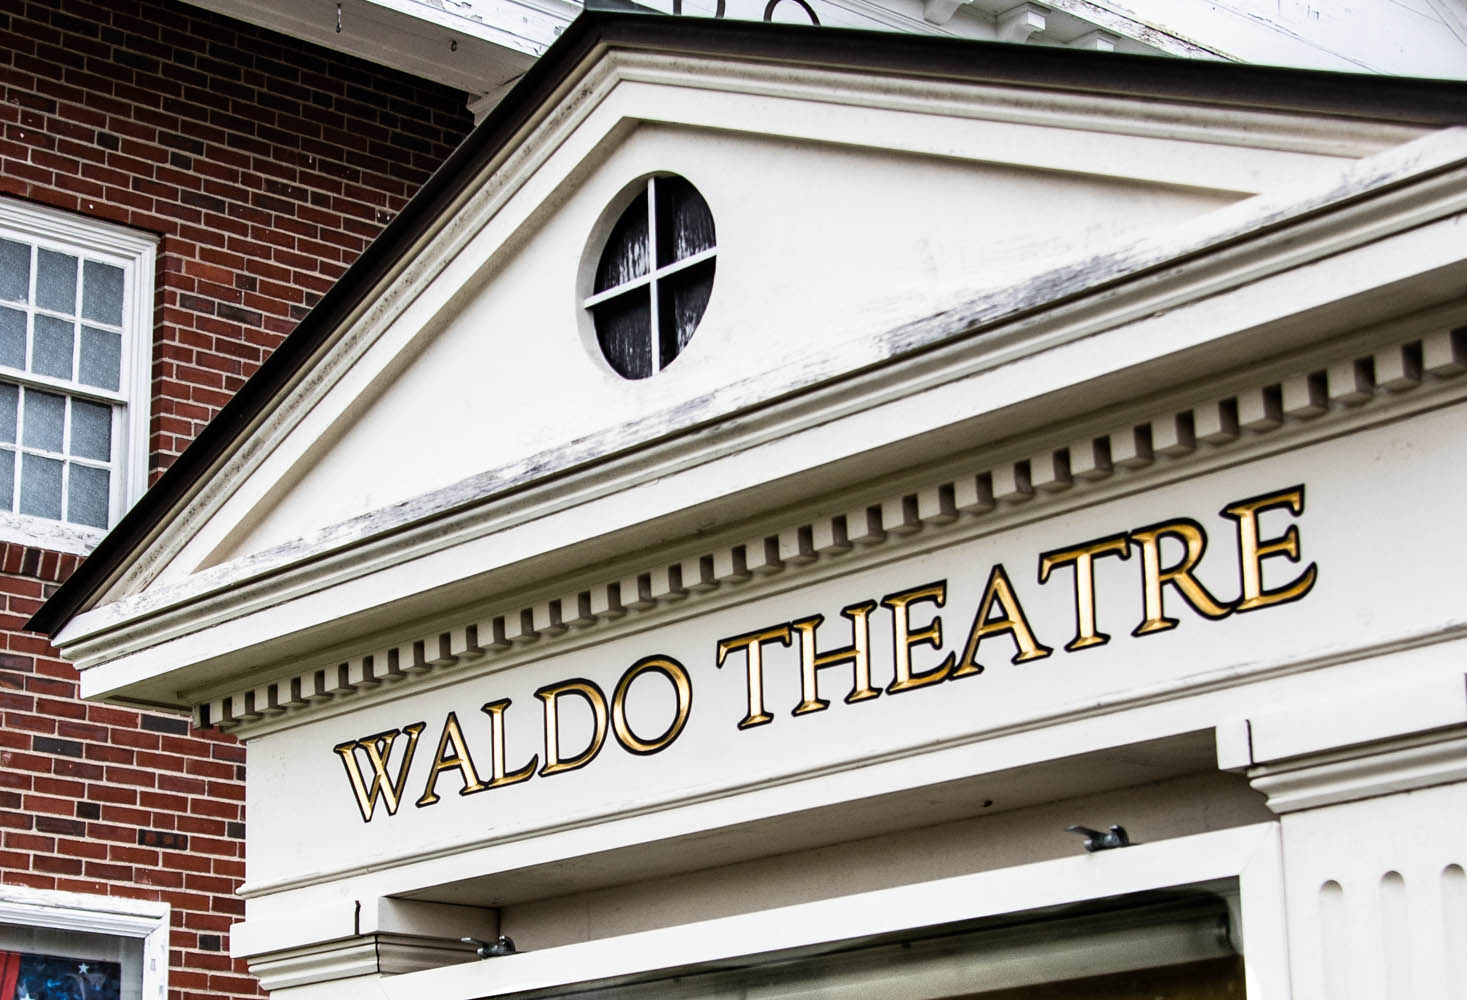 The facade of the Waldo Theatre in Waldoboro in May 2020, prior to the completion of the renovation. (Bisi Cameron Yee photo, LCN file)